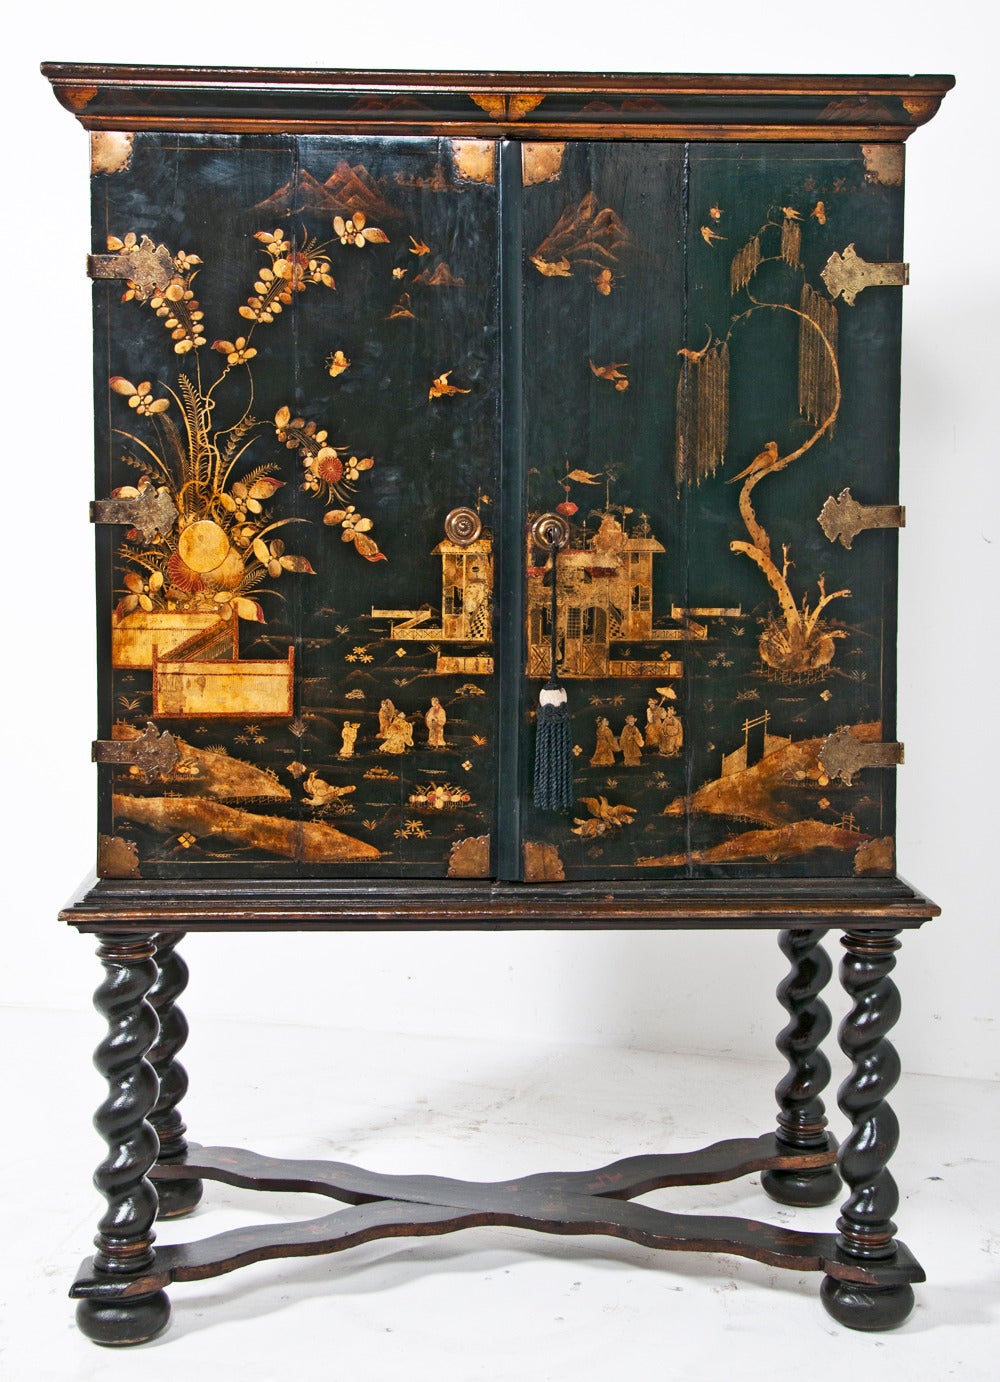 A very nice example of a lacquered cabinet on stand decorated in the Chinese style but made in Holland or England early in the 18th century.  During this period the best of everything came from the Orient and English and Continental imitations where